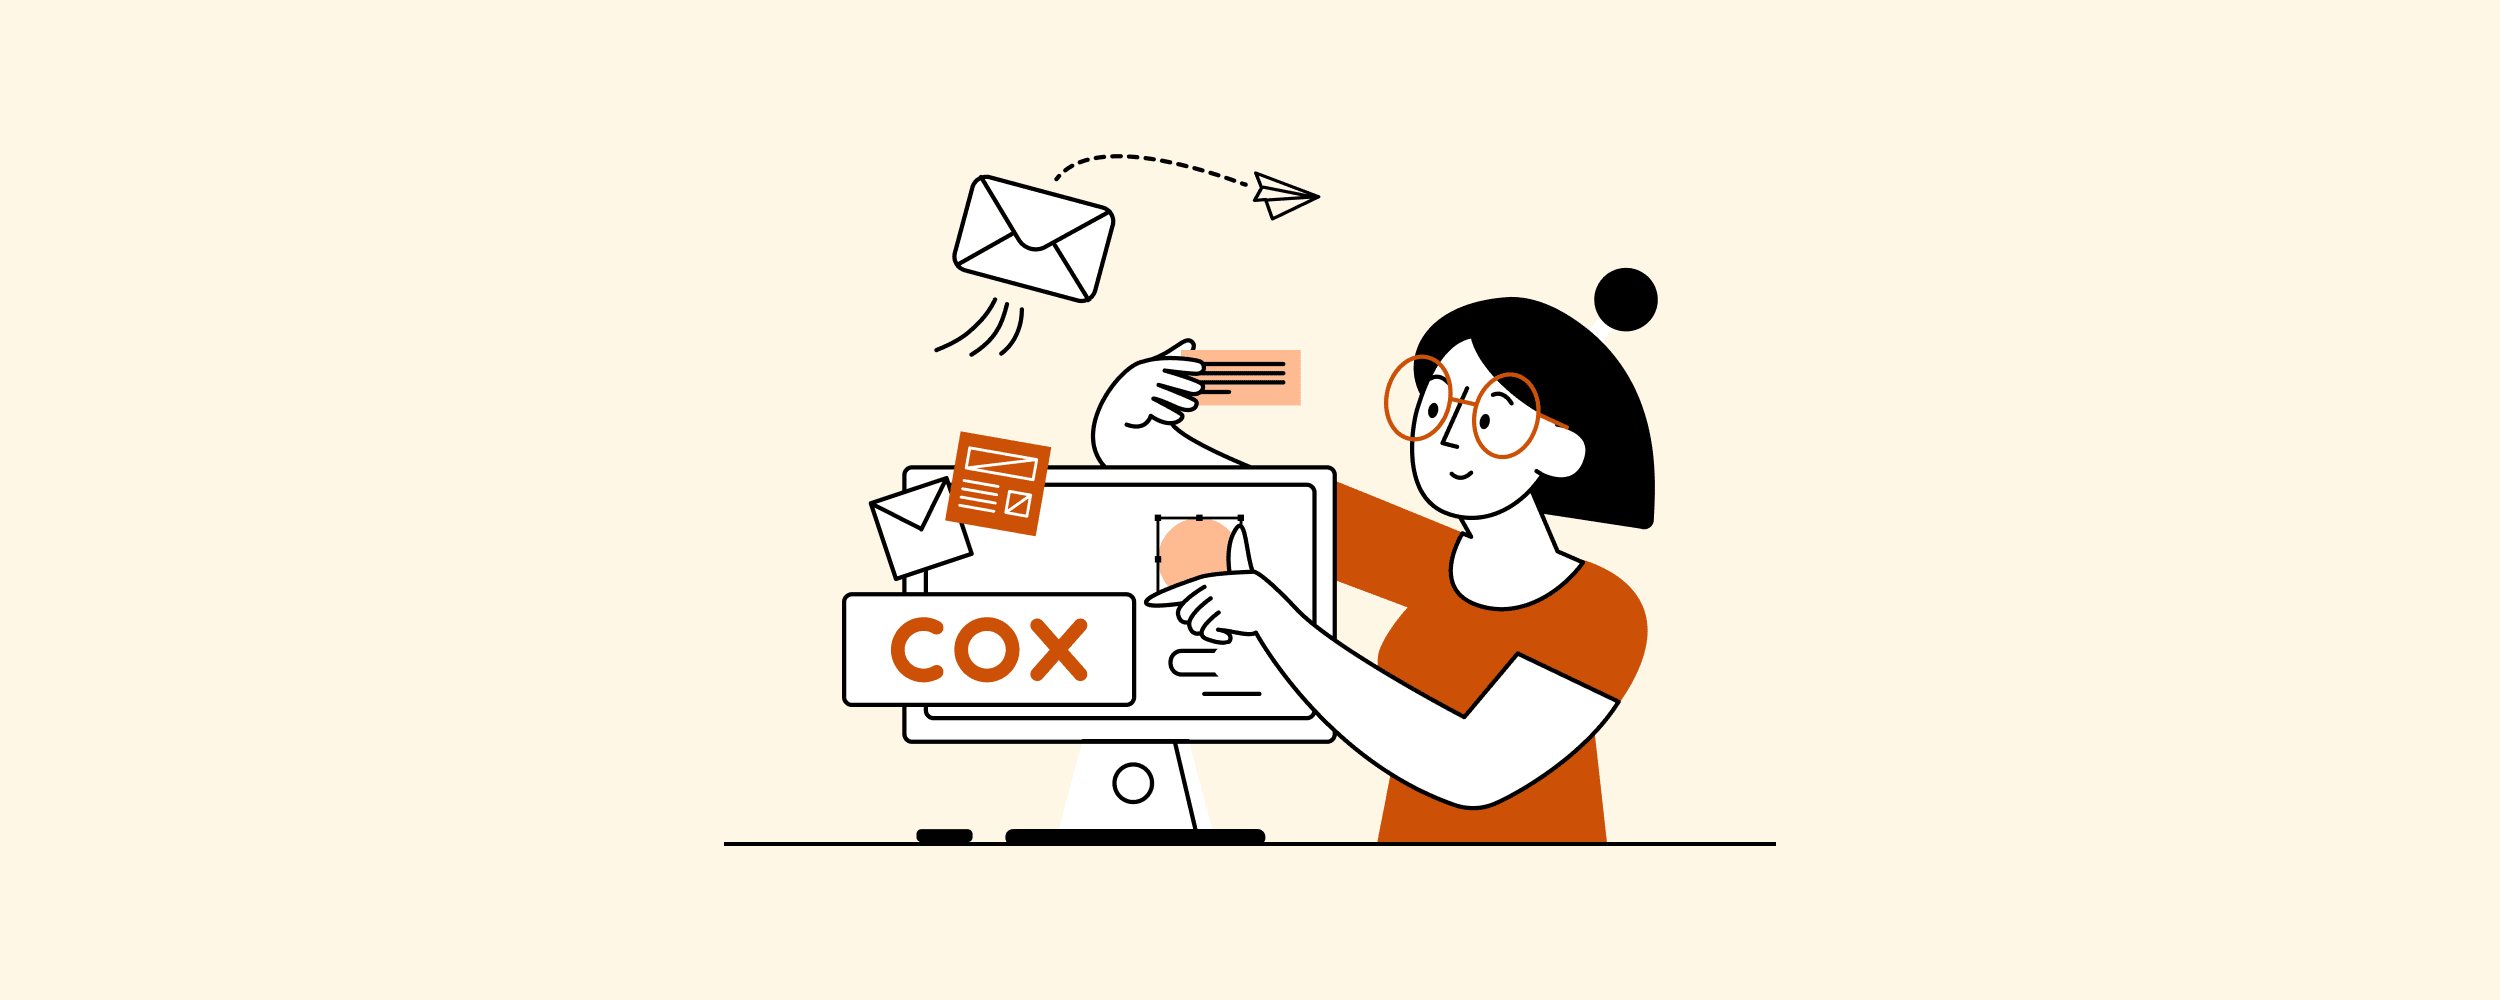 Cox business email set up